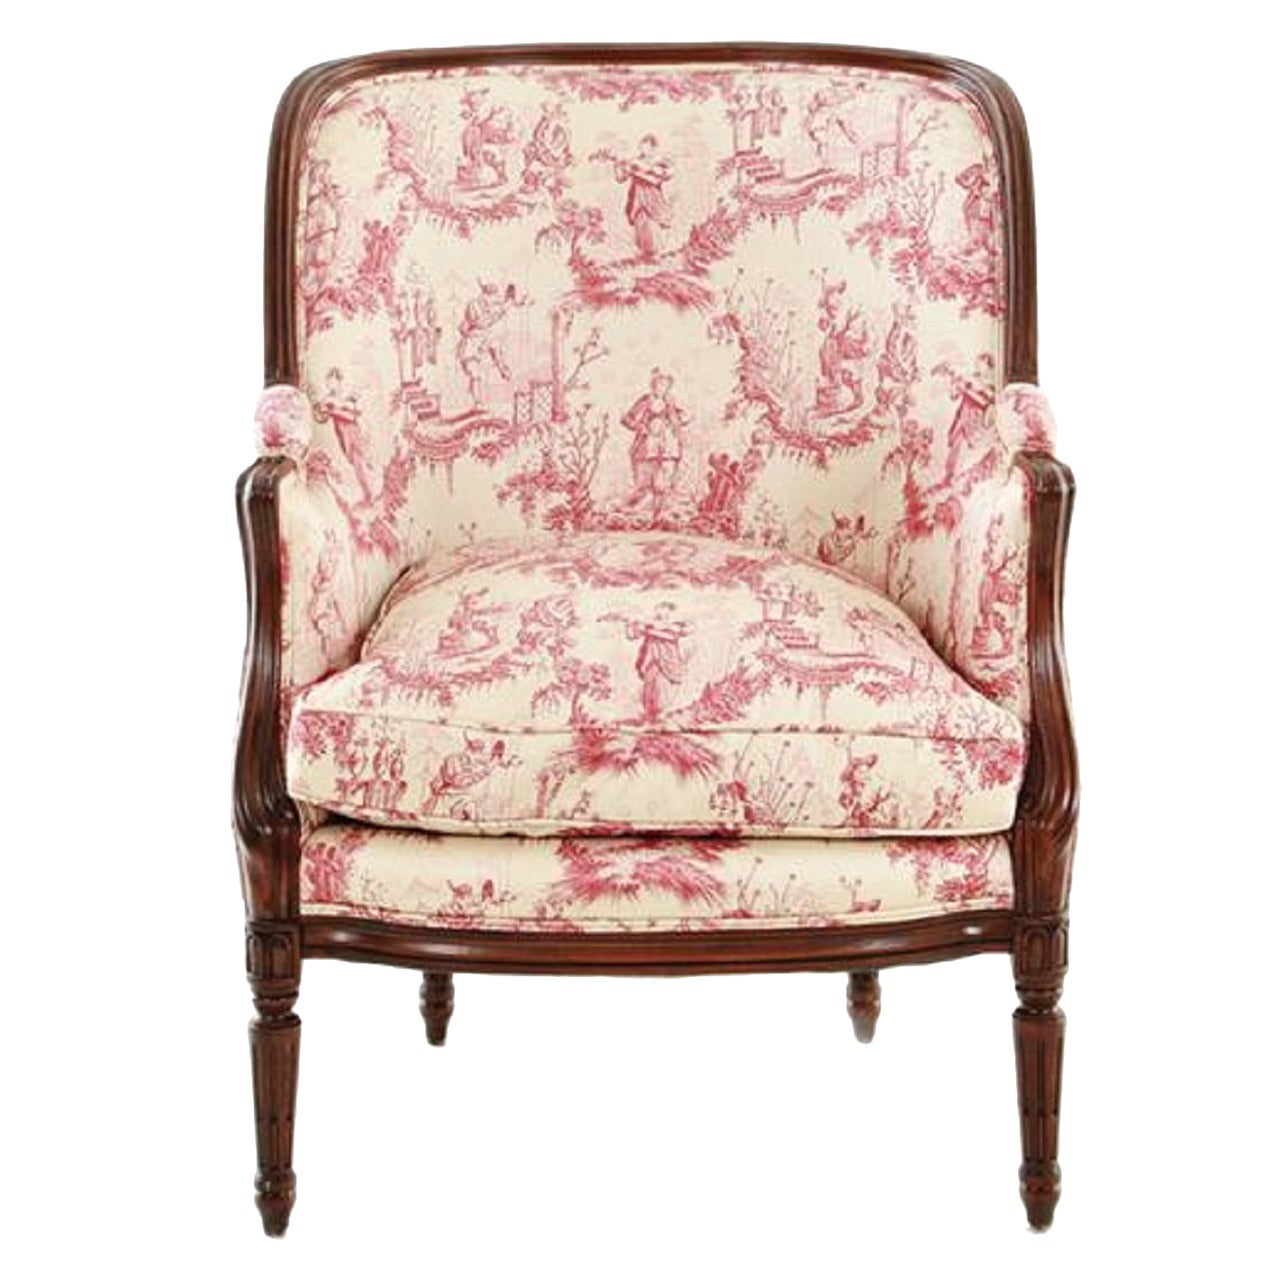 Louis XVI Style Upholstered Carved Mahogany Bergere or Armchair, 20th Century